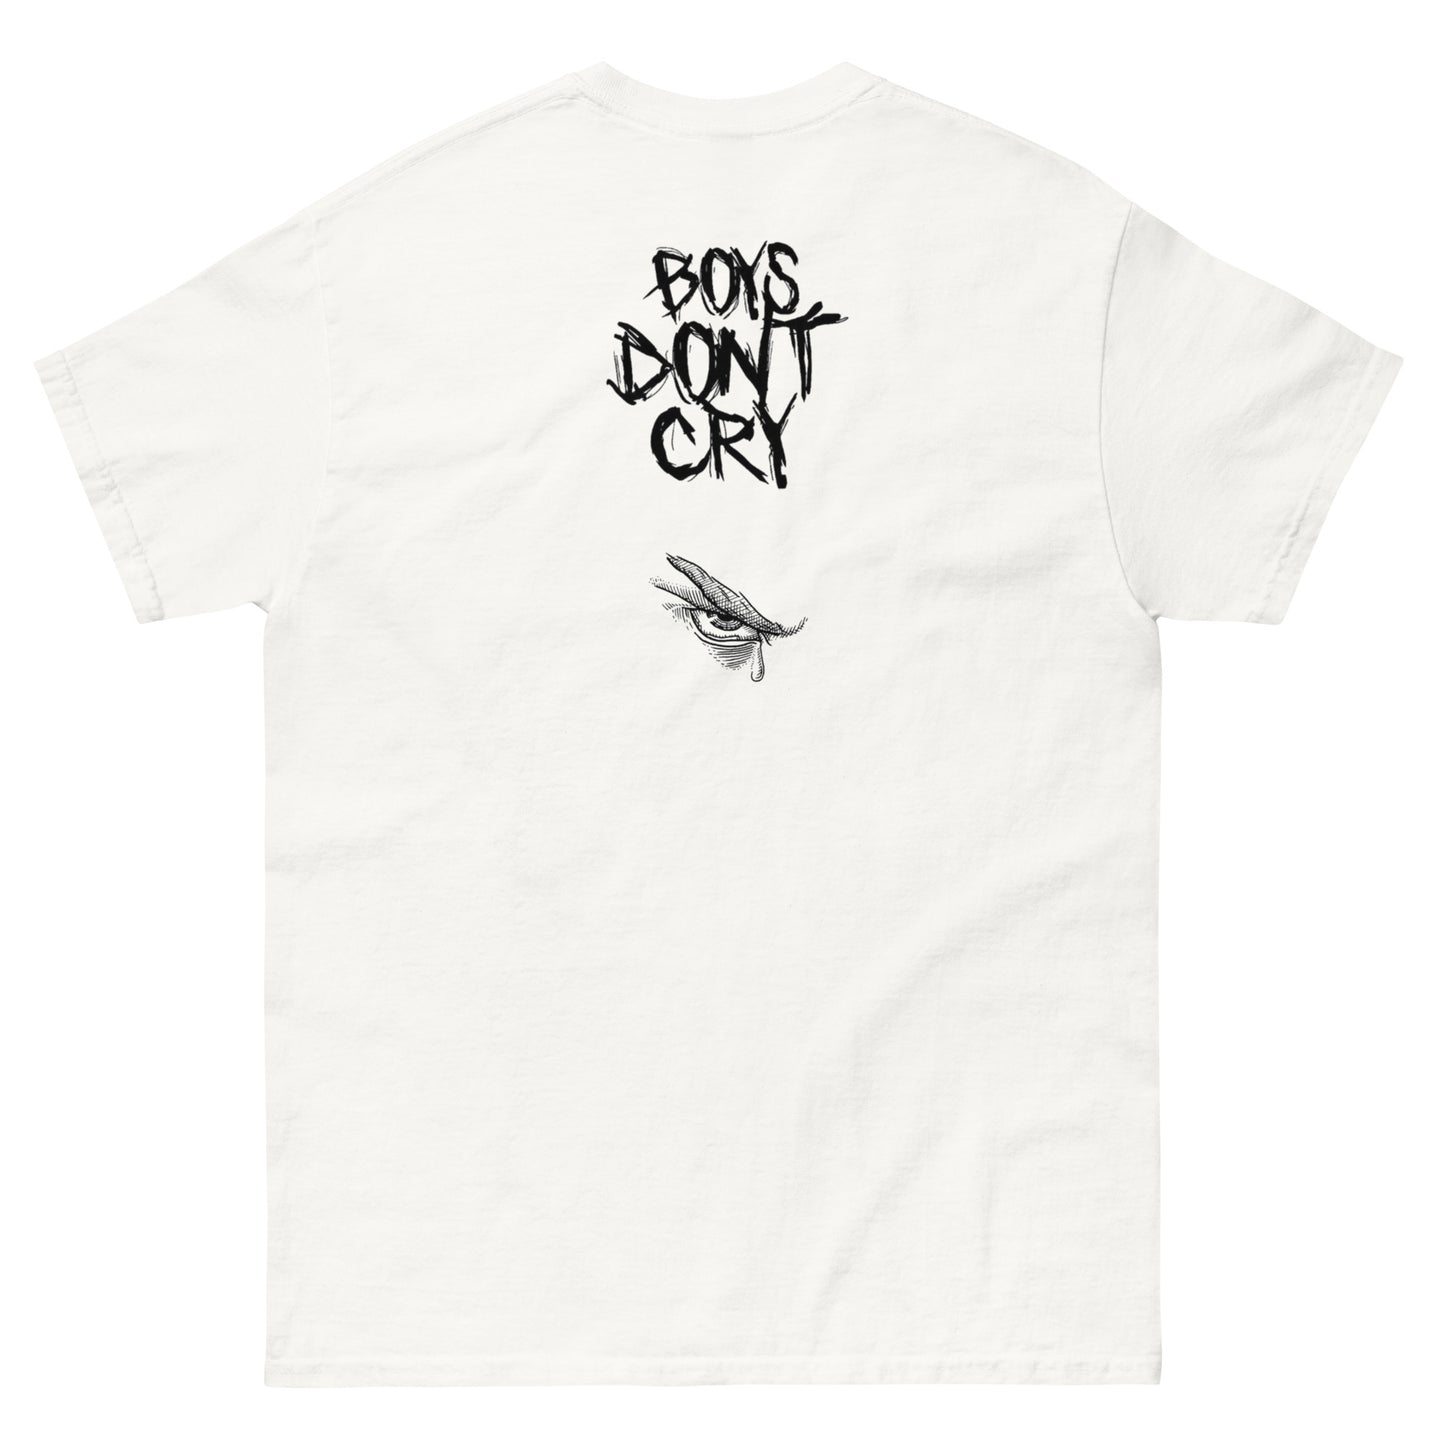 Boys don't cry (white)